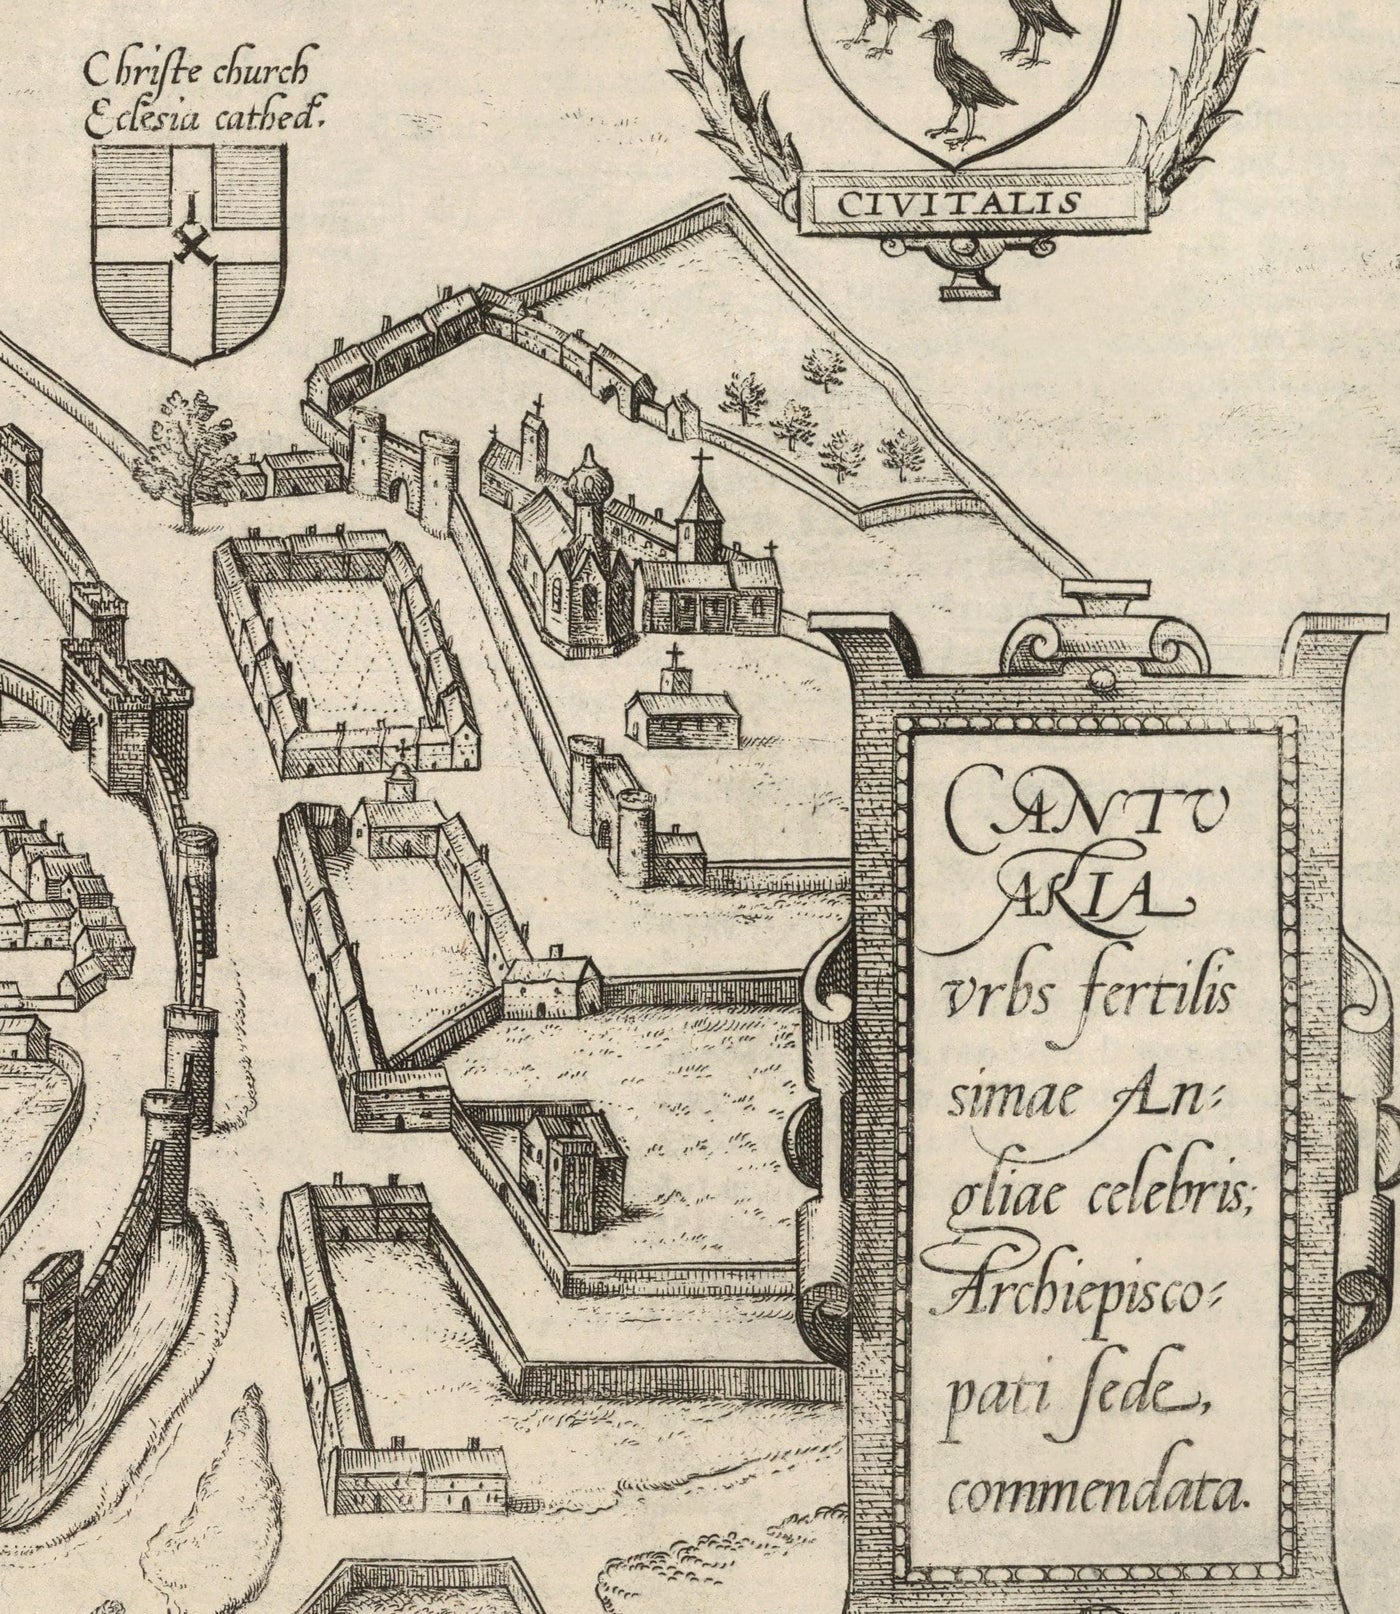 Old Map of Canterbury 1588 by Georg Braun - Castle, Cathedral, Church, City Walls